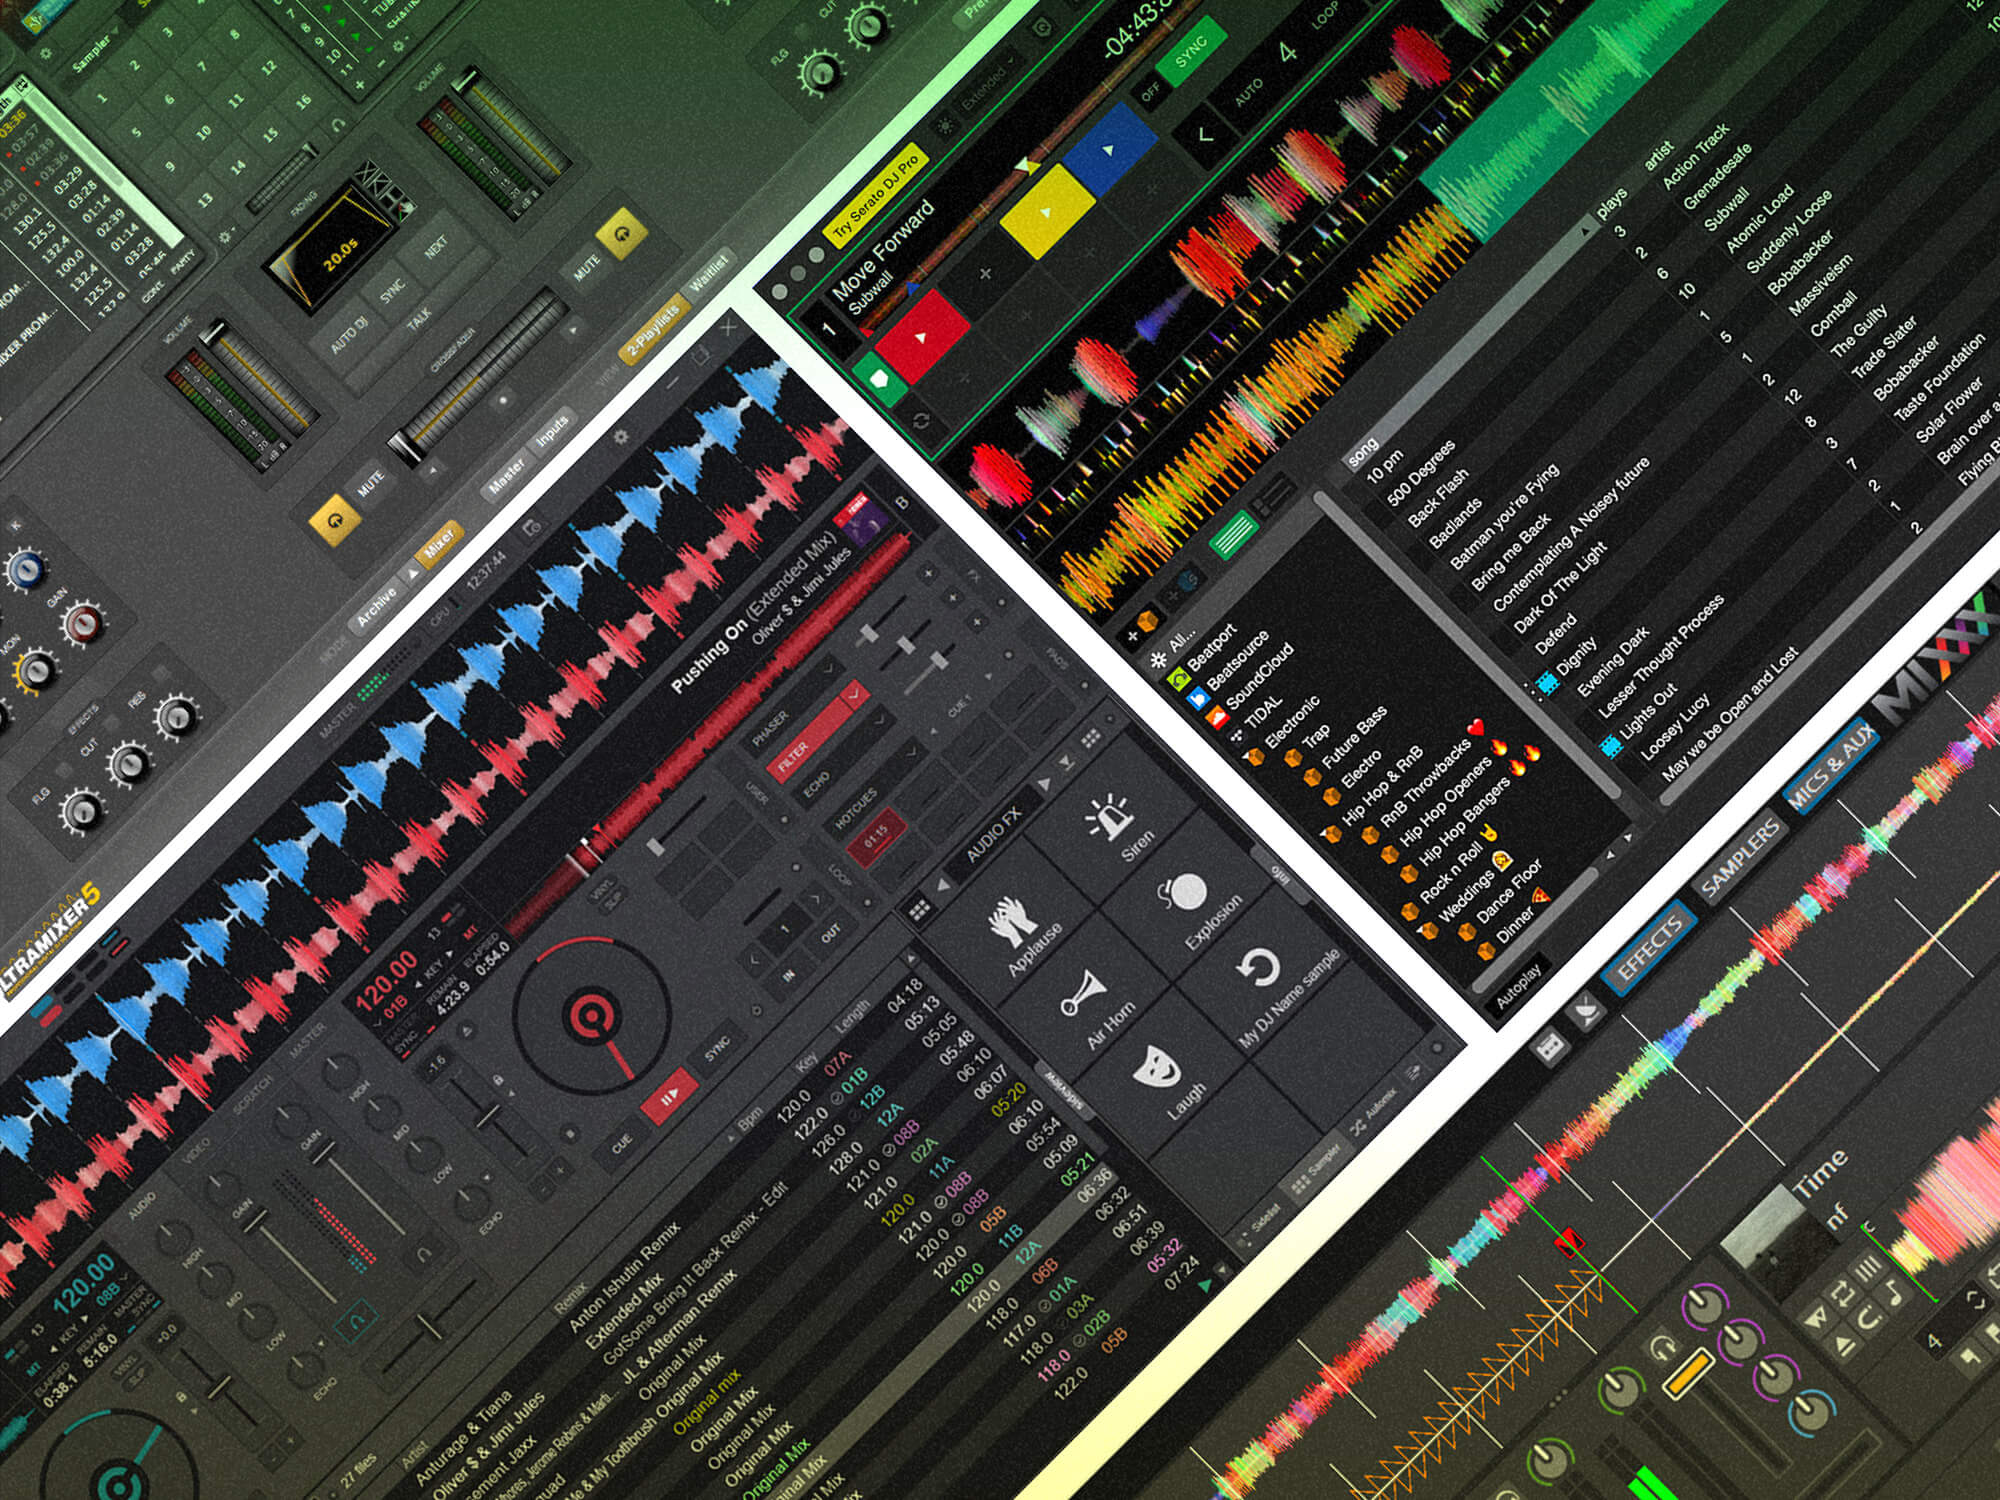 Free software for DJs